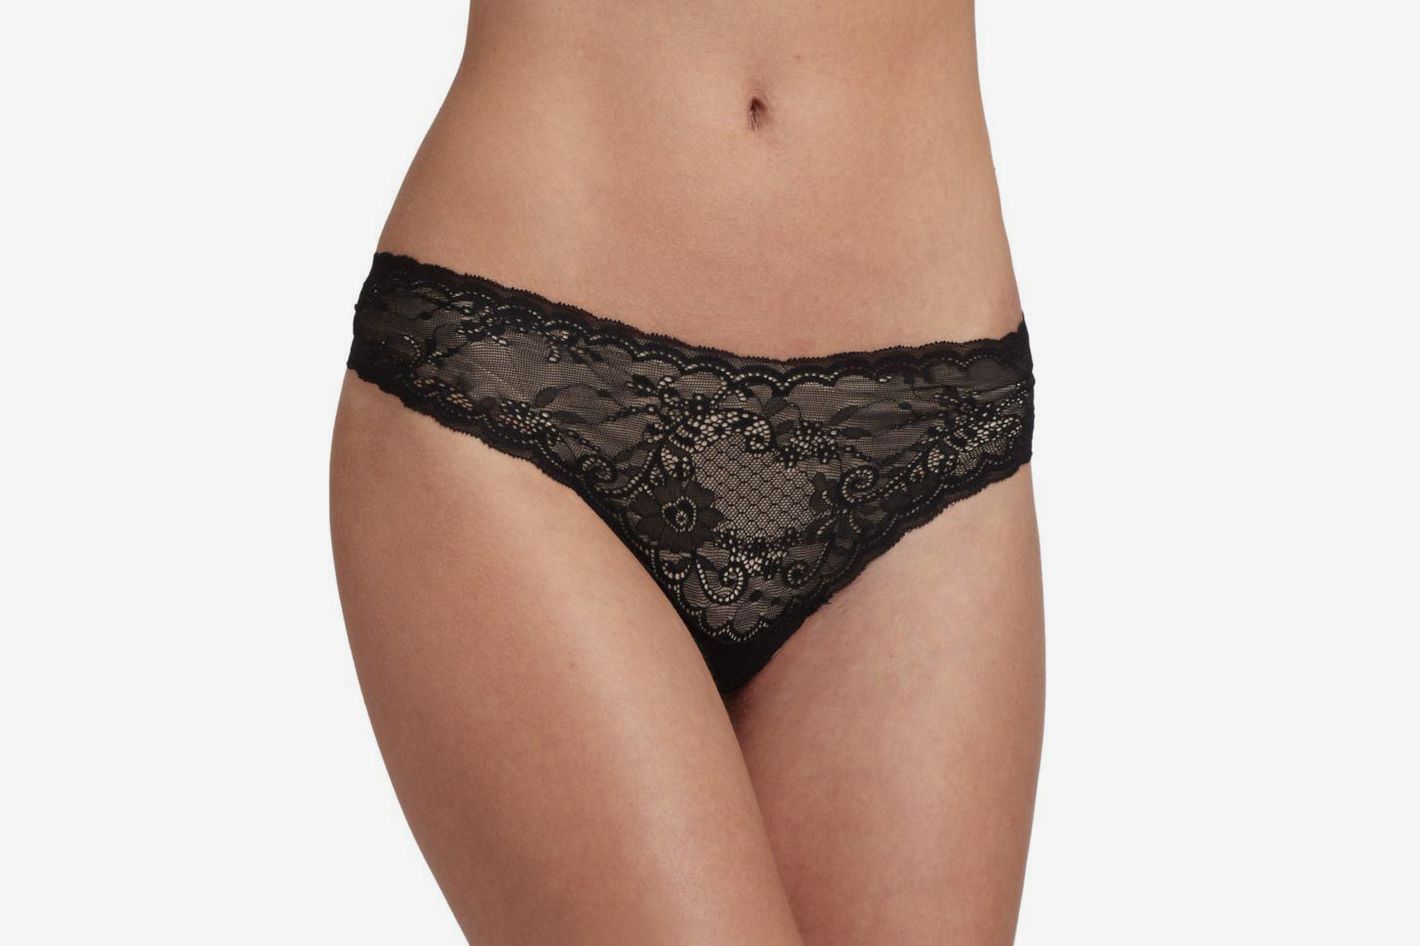 Laura Womens G-String Thong Adjusts to Your Fit See Through Lace